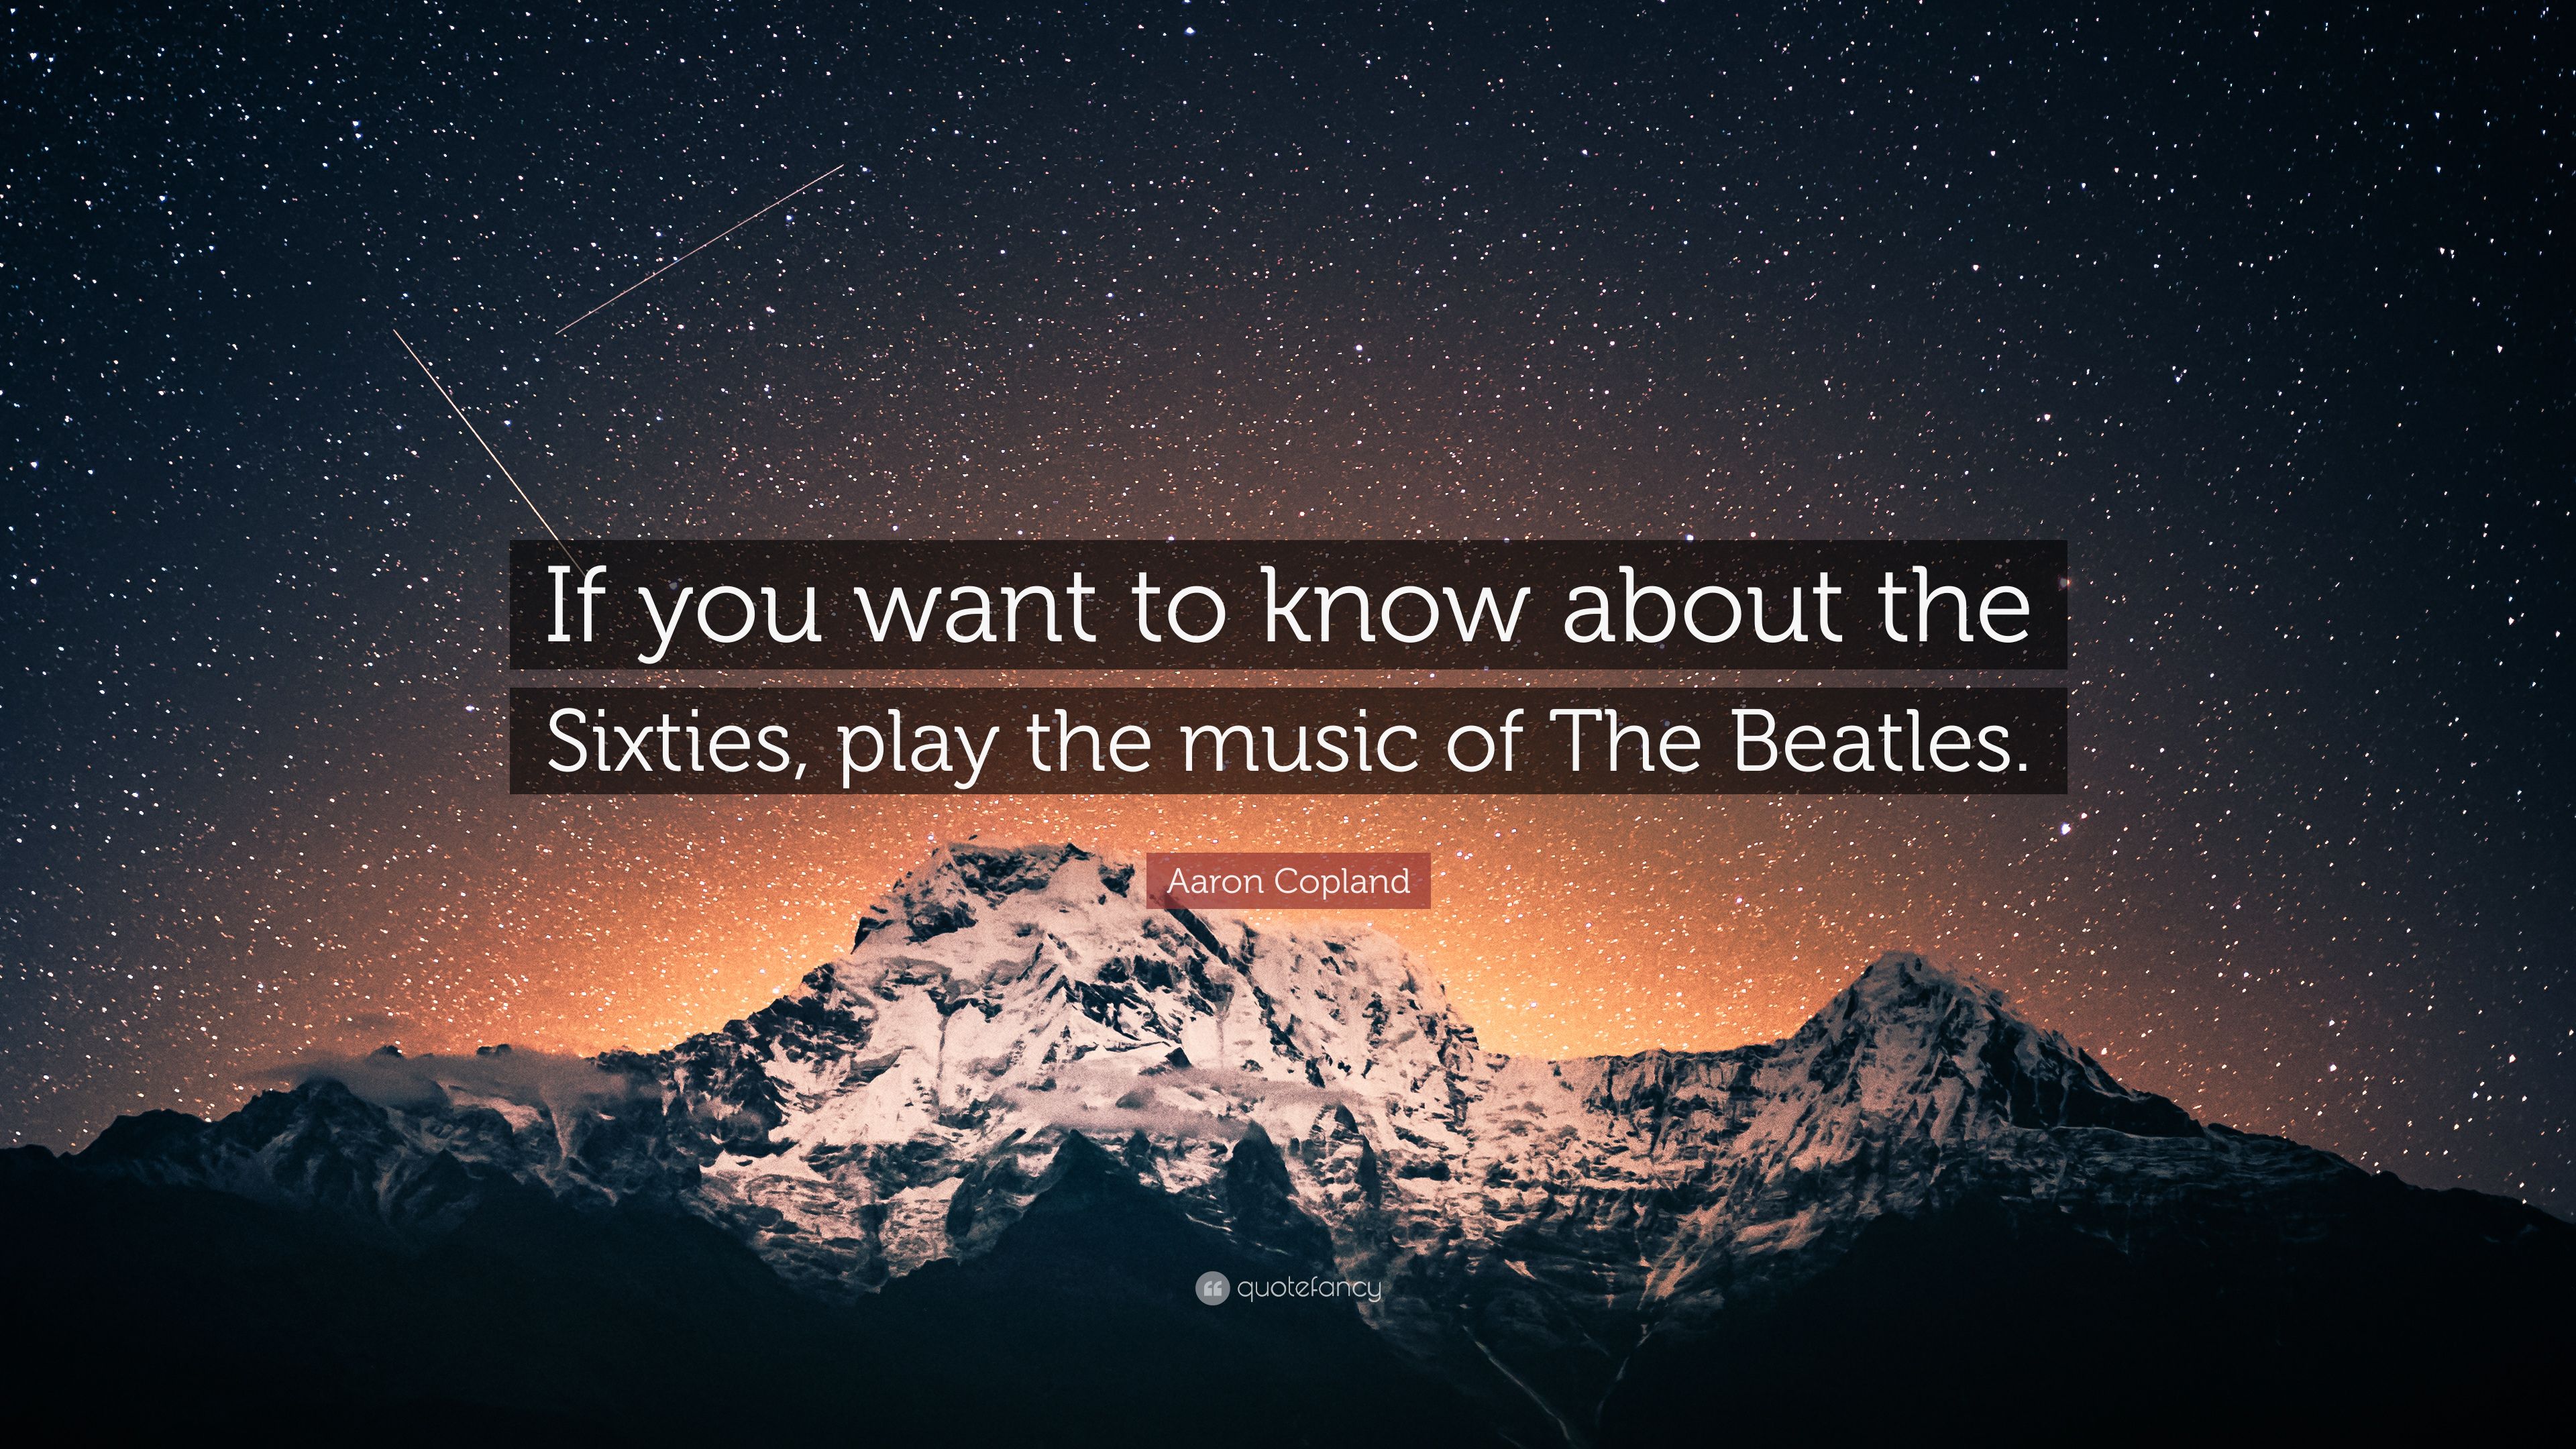 Aaron Copland Quote: “If you want to know about the Sixties, play